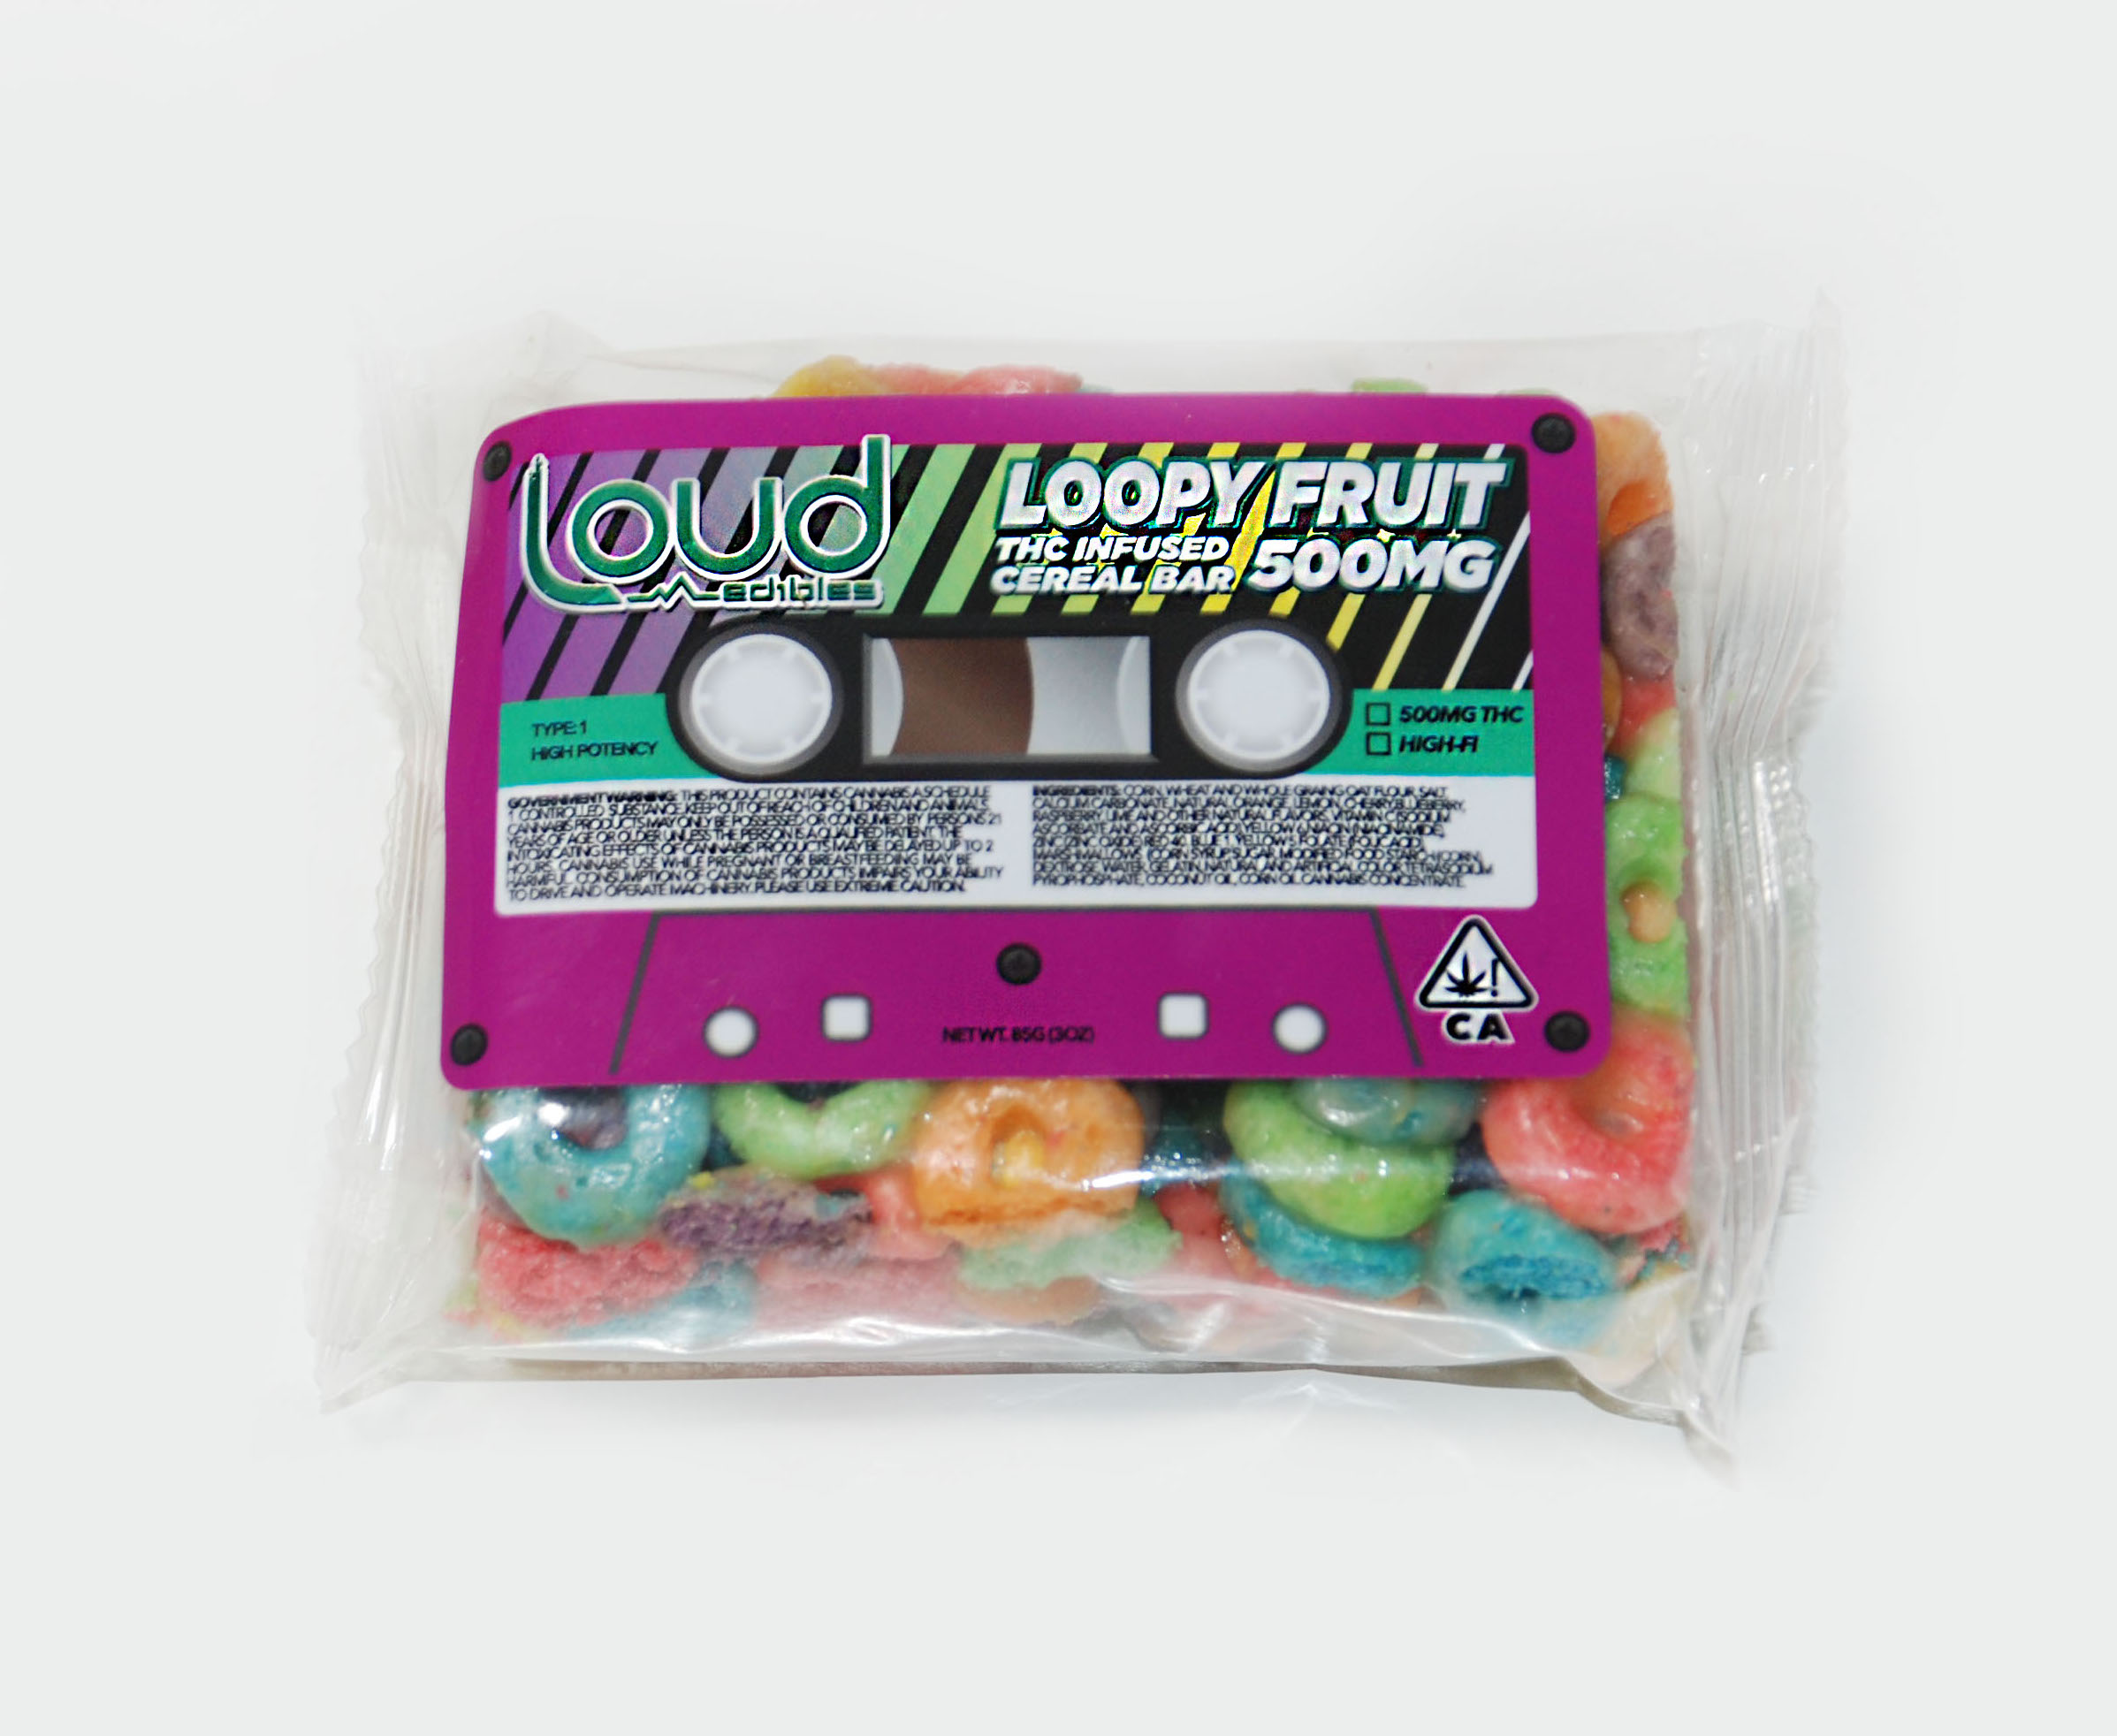 Loud Edibles Loopy Fruit Cereal Bar delivery in Los Angeles